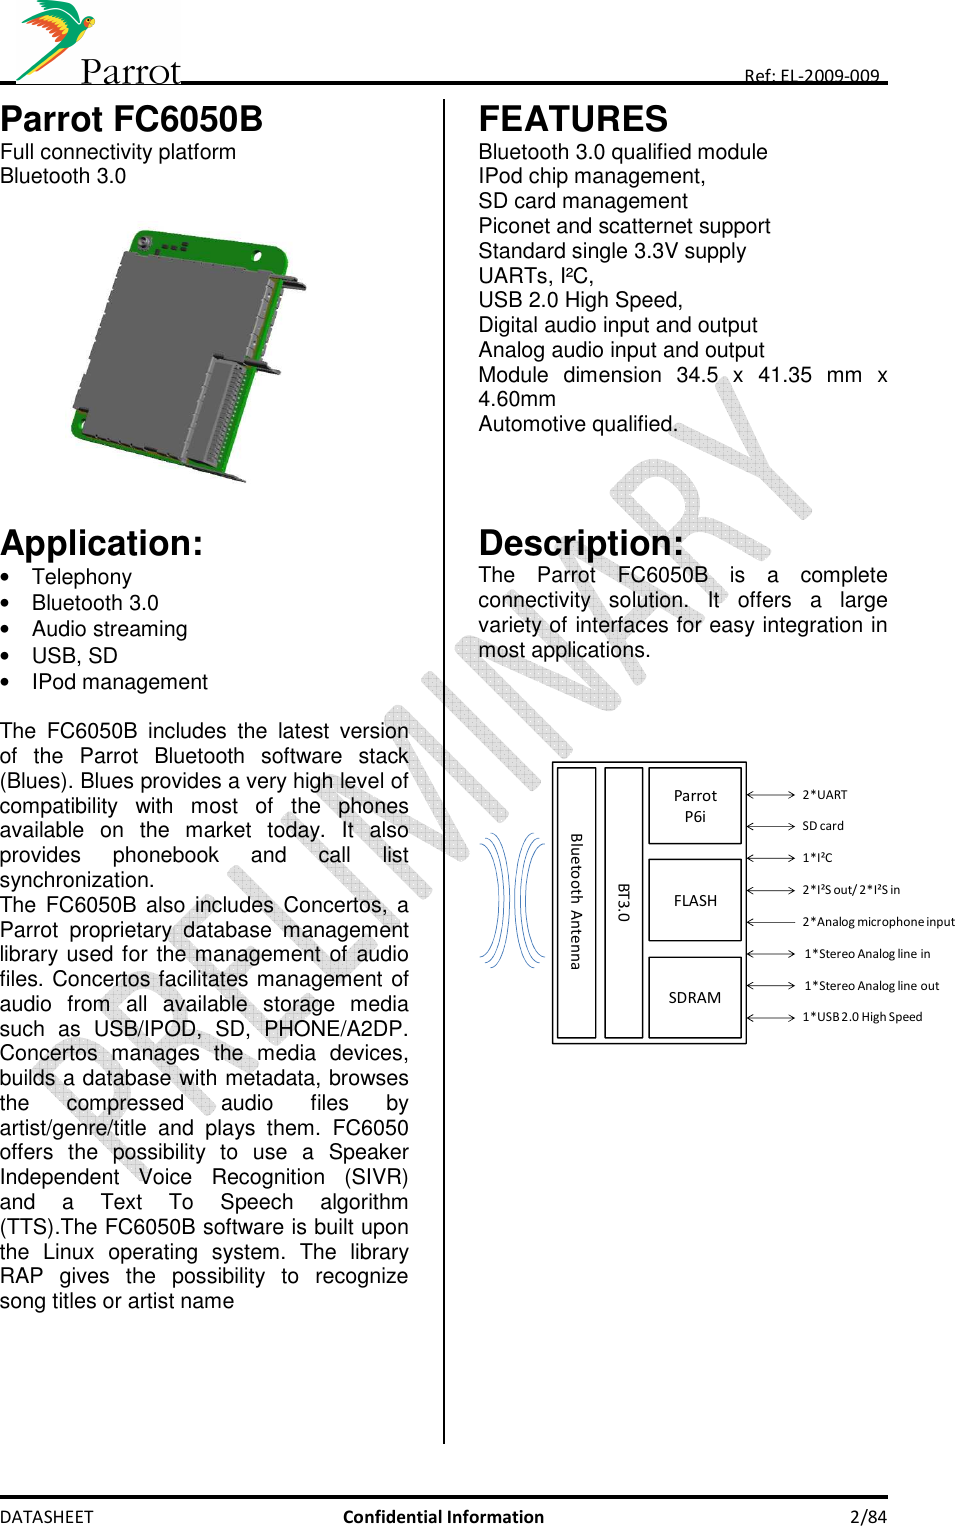     DATASHEET  Confidential Information  2/84 Ref: EL-2009-009 Parrot FC6050B Full connectivity platform Bluetooth 3.0             FEATURES Bluetooth 3.0 qualified module IPod chip management,  SD card management Piconet and scatternet support Standard single 3.3V supply UARTs, I²C, USB 2.0 High Speed,  Digital audio input and output Analog audio input and output Module  dimension  34.5  x  41.35  mm  x 4.60mm  Automotive qualified.    Application: •  Telephony •  Bluetooth 3.0 •  Audio streaming •  USB, SD •  IPod management  The  FC6050B  includes  the  latest  version of  the  Parrot  Bluetooth  software  stack (Blues). Blues provides a very high level of compatibility  with  most  of  the  phones available  on  the  market  today.  It  also provides  phonebook  and  call  list synchronization. The FC6050B also  includes  Concertos,  a Parrot  proprietary  database  management library used for the management of audio files. Concertos facilitates management of audio  from  all  available  storage  media such  as  USB/IPOD,  SD,  PHONE/A2DP. Concertos  manages  the  media  devices, builds a database with metadata, browses the  compressed  audio  files  by artist/genre/title  and  plays  them.  FC6050 offers  the  possibility  to  use  a  Speaker Independent  Voice  Recognition  (SIVR) and  a  Text  To  Speech  algorithm (TTS).The FC6050B software is built upon the  Linux  operating  system.  The  library RAP  gives  the  possibility  to  recognize song titles or artist name     Description: The  Parrot  FC6050B  is  a  complete connectivity  solution.  It  offers  a  large variety of interfaces for easy integration in most applications.     ParrotP6iFLASHSDRAM2*UART1*I²C2*I²S out/ 2*I²S in2*Analog microphone input1*Stereo Analog line inBT3.01*USB 2.0 High SpeedSD cardBluetooth Antenna1*Stereo Analog line out  